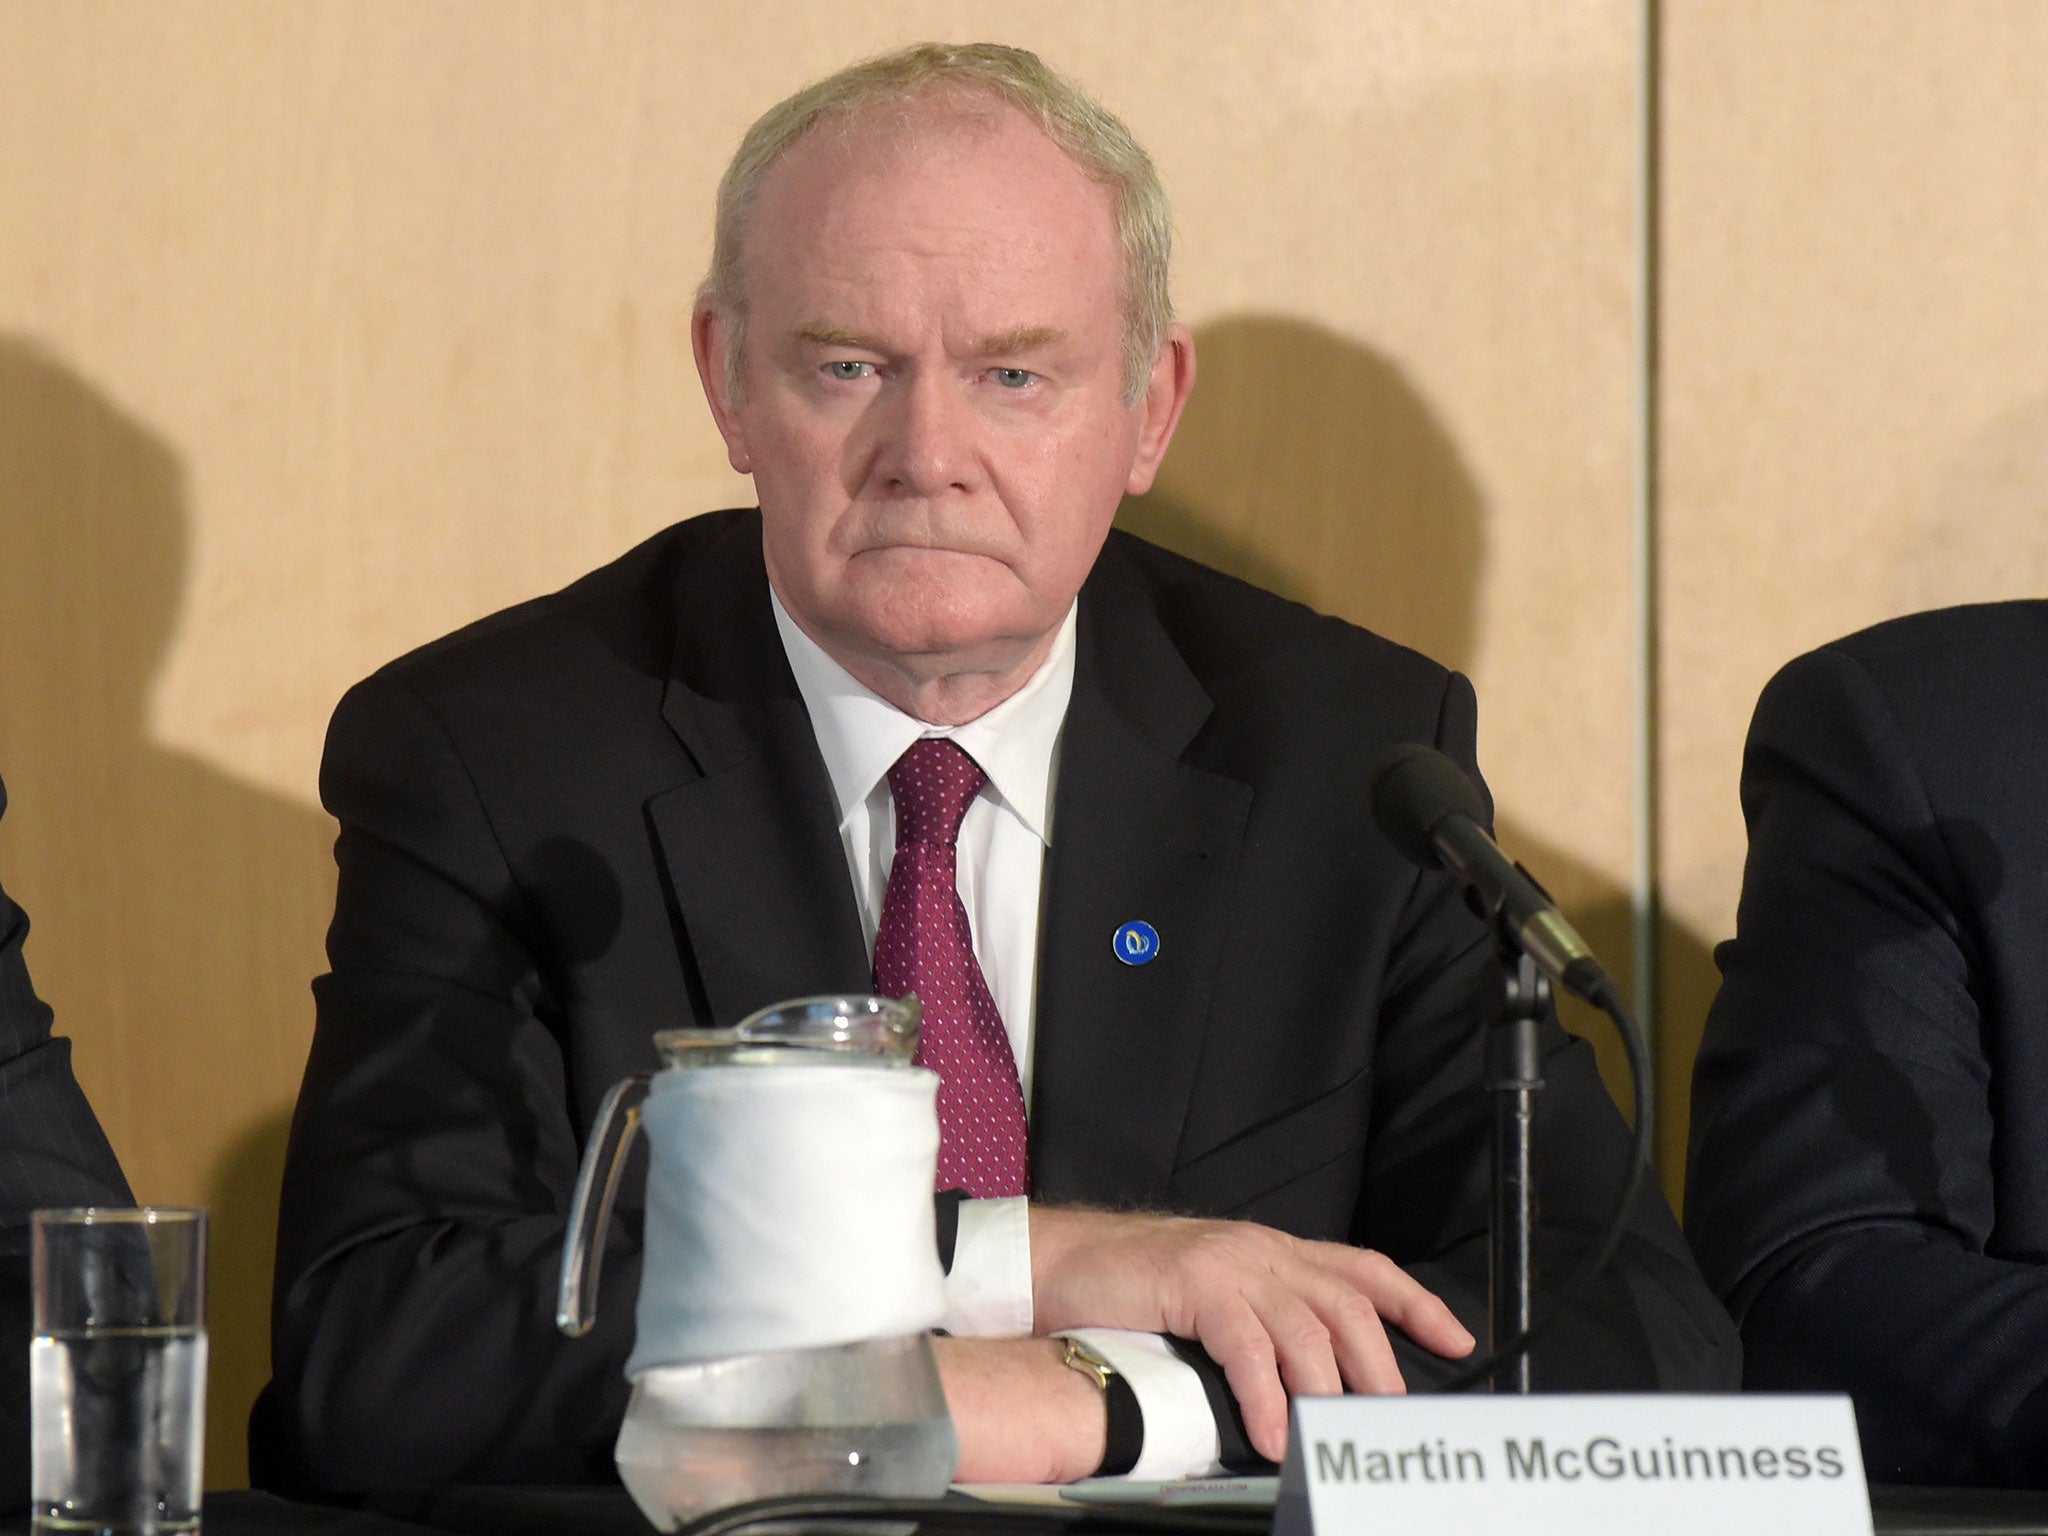 Martin McGuinness urged for a ‘rigorous process’ to recoup as much of the £140m as possible